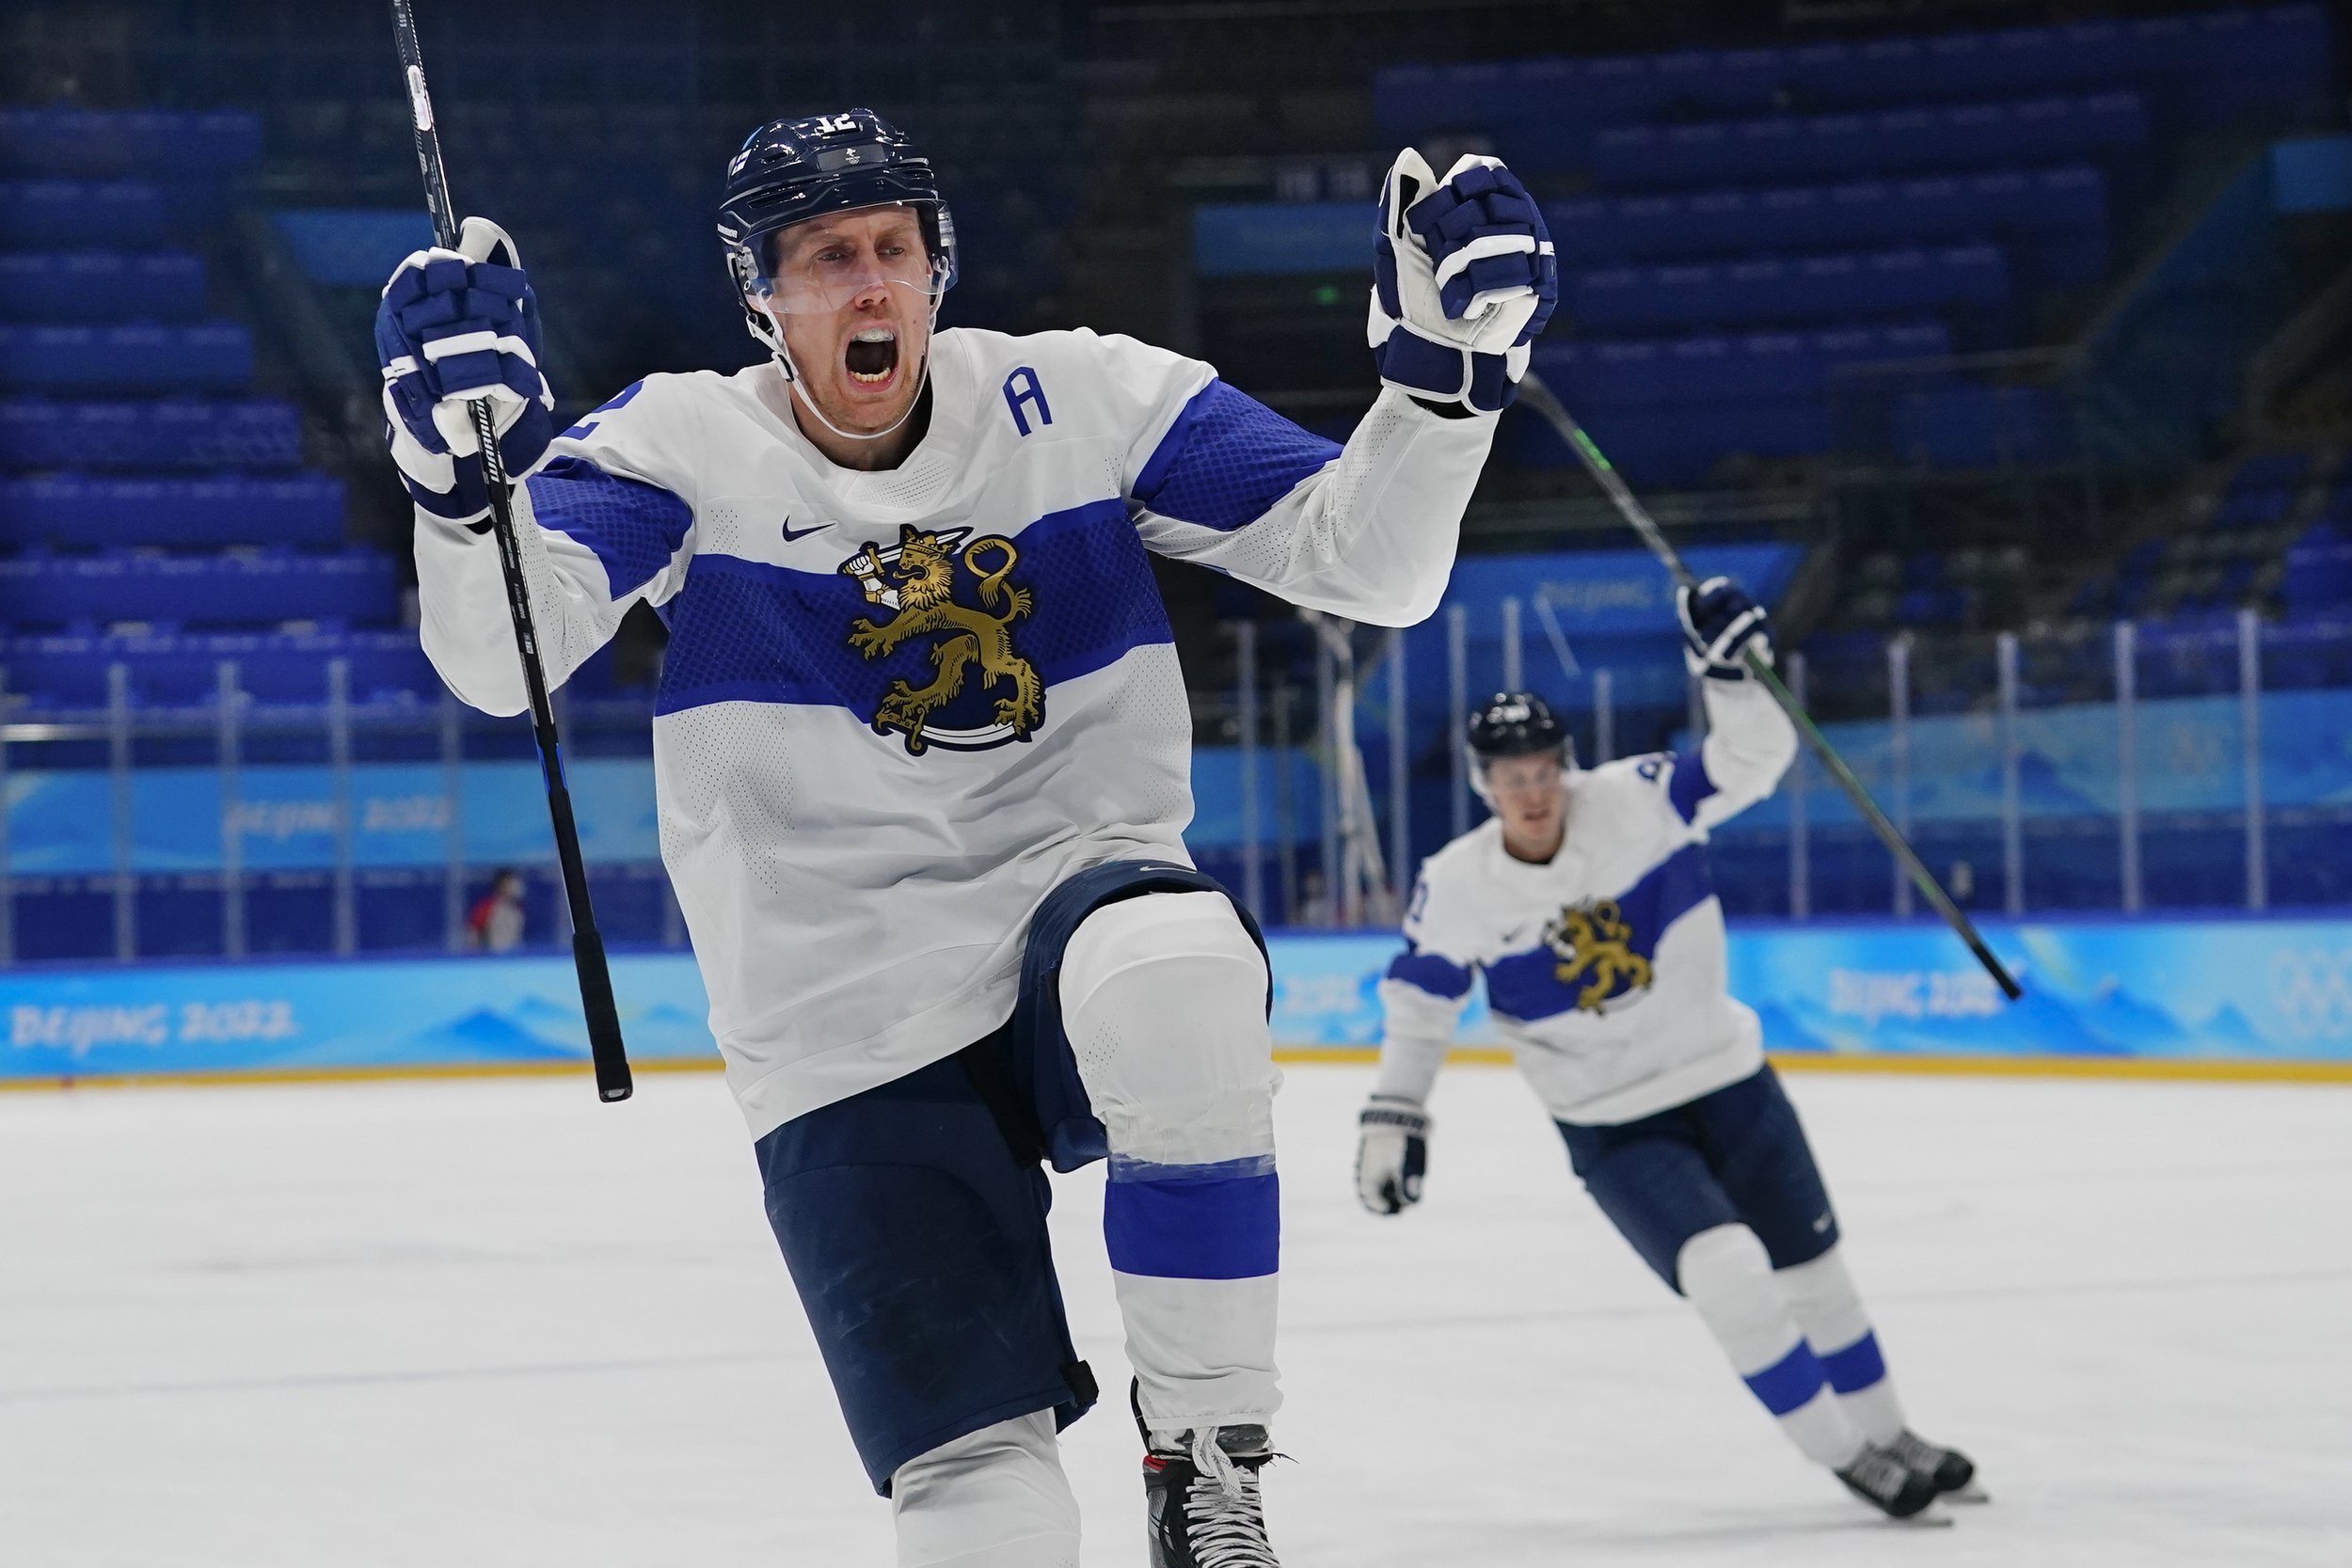  Finland's Marko Anttila, left, celebrates after scoring a goal against Latvia during a preliminary round men's hockey game at the 2022 Winter Olympics, Friday, Feb. 11, 2022, in Beijing. (AP Photo/Matt Slocum) 